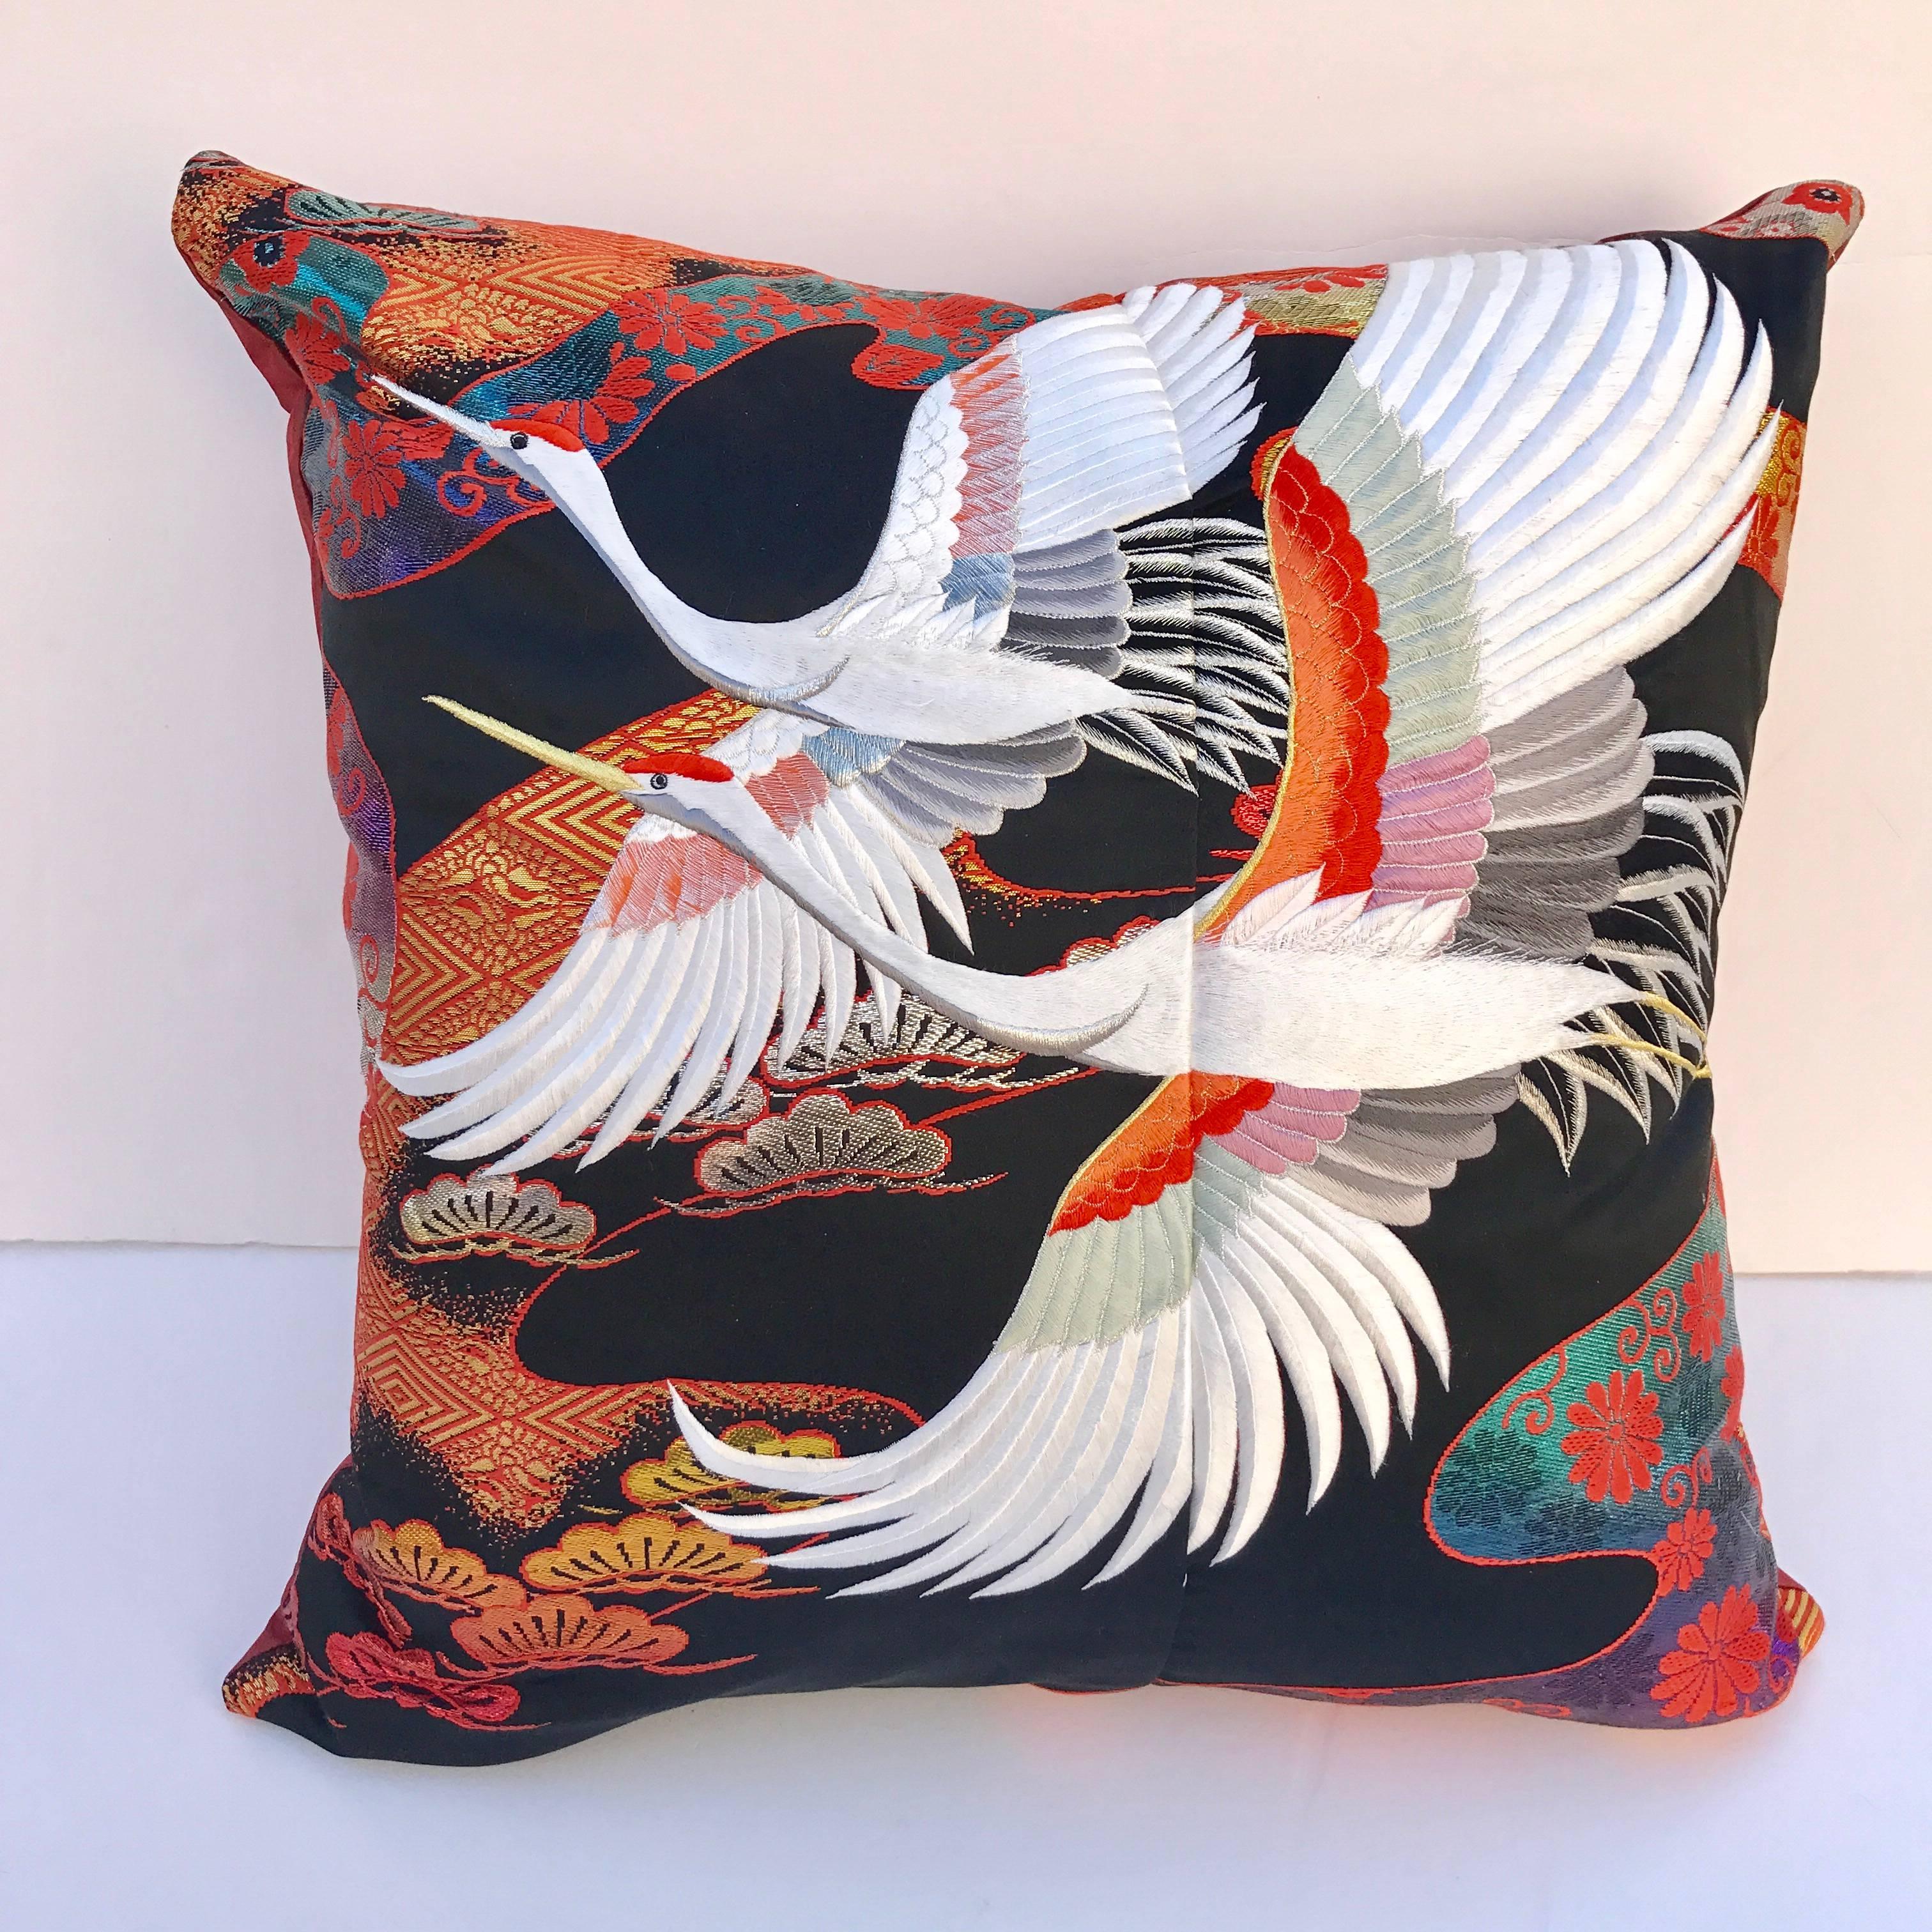 Custom pillow cut from a vintage Japanese silk Uchikake, the traditional wedding kimono. The black silk is embellished with vibrant designs and embroidered birds. The pillow is backed in silk, filled with an insert of 50/50 down and feathers and